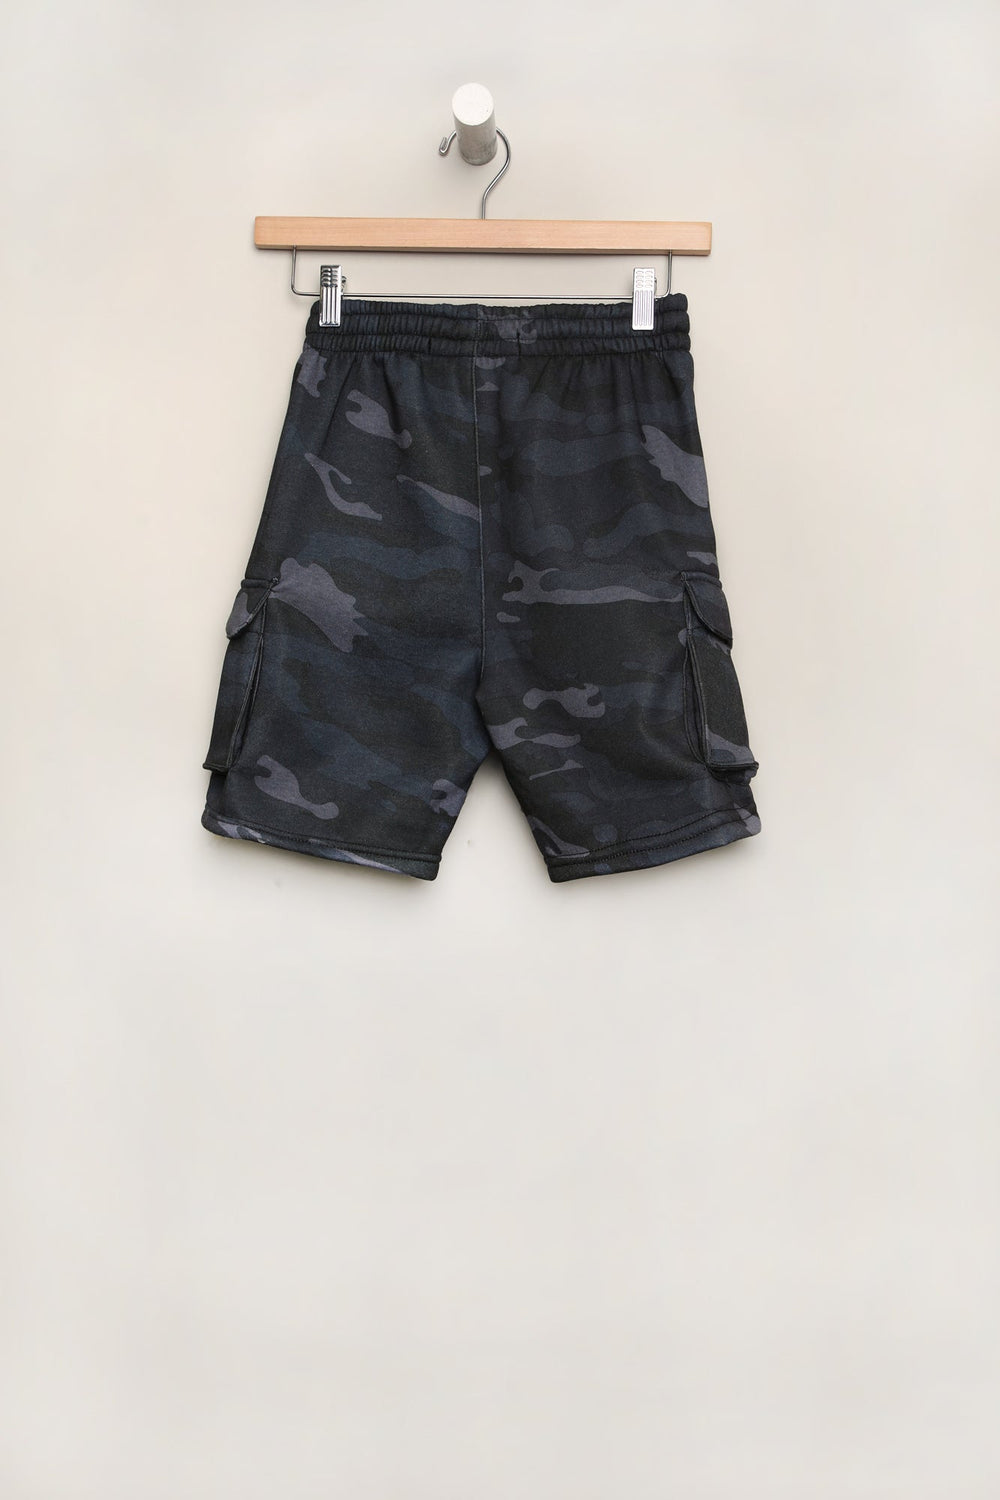 West49 Youth Fleece Camo Cargo Shorts West49 Youth Fleece Camo Cargo Shorts